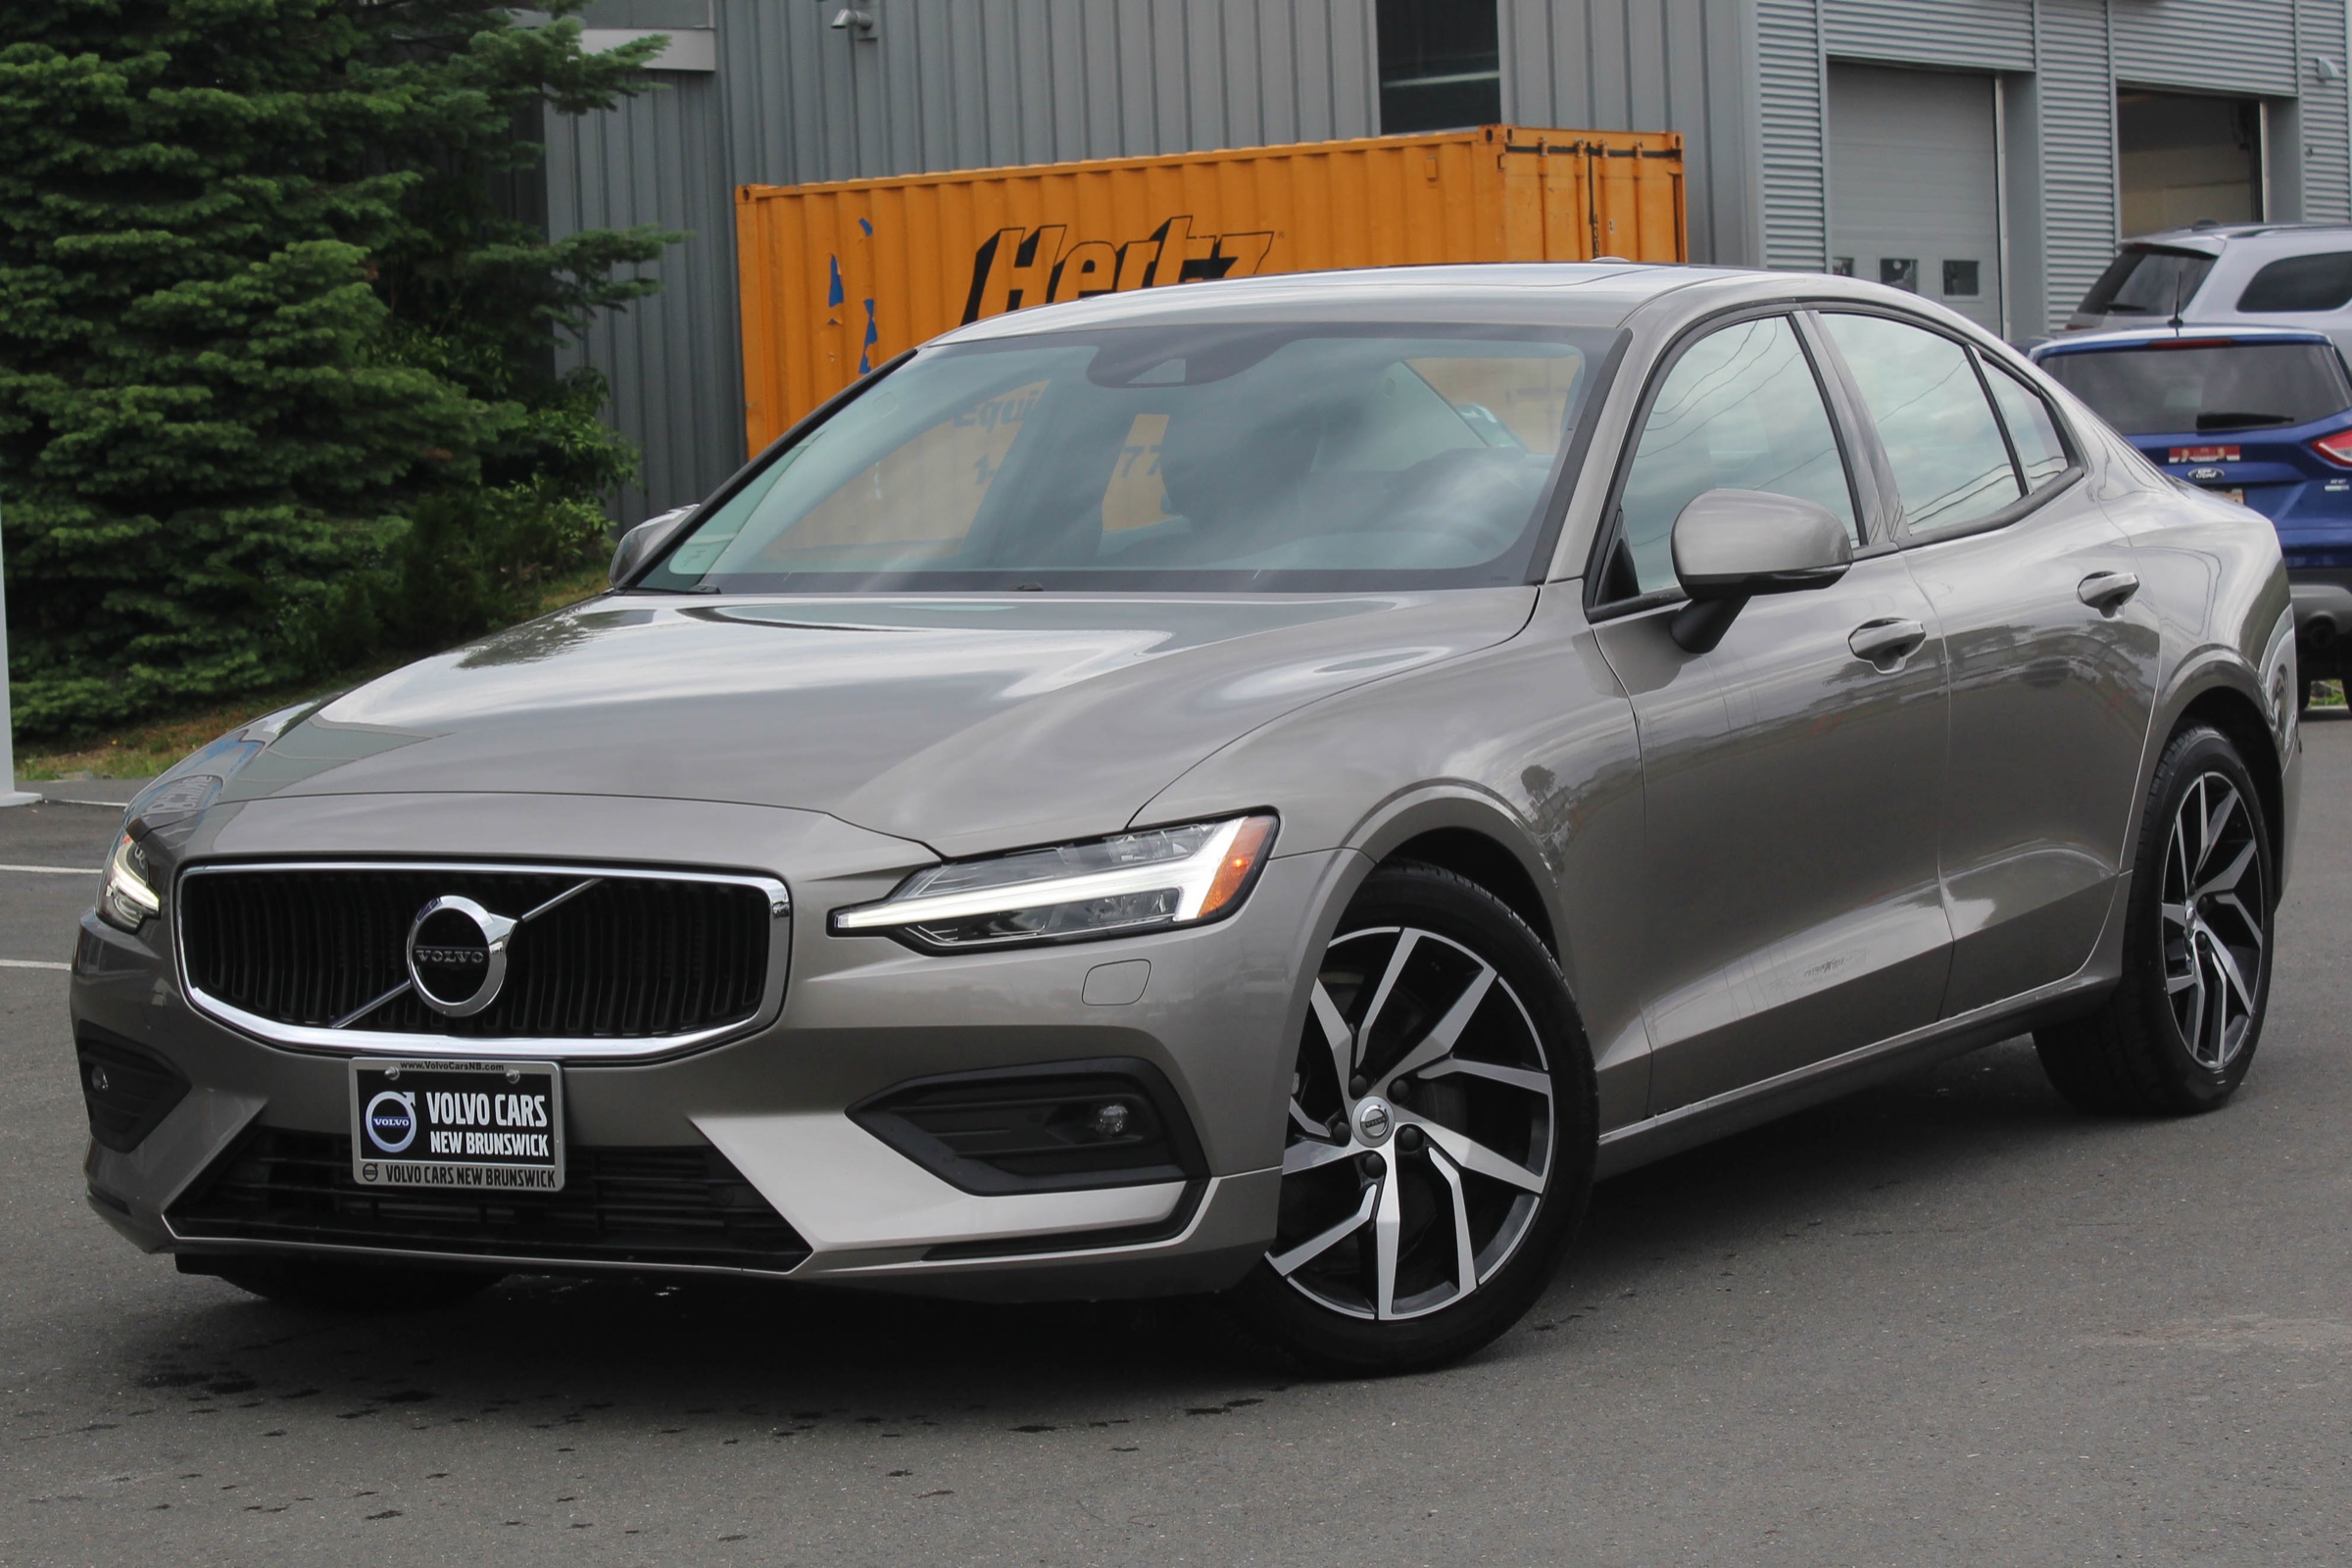 Certified Pre-Owned 2019 Volvo S60 T6 Momentum AWD